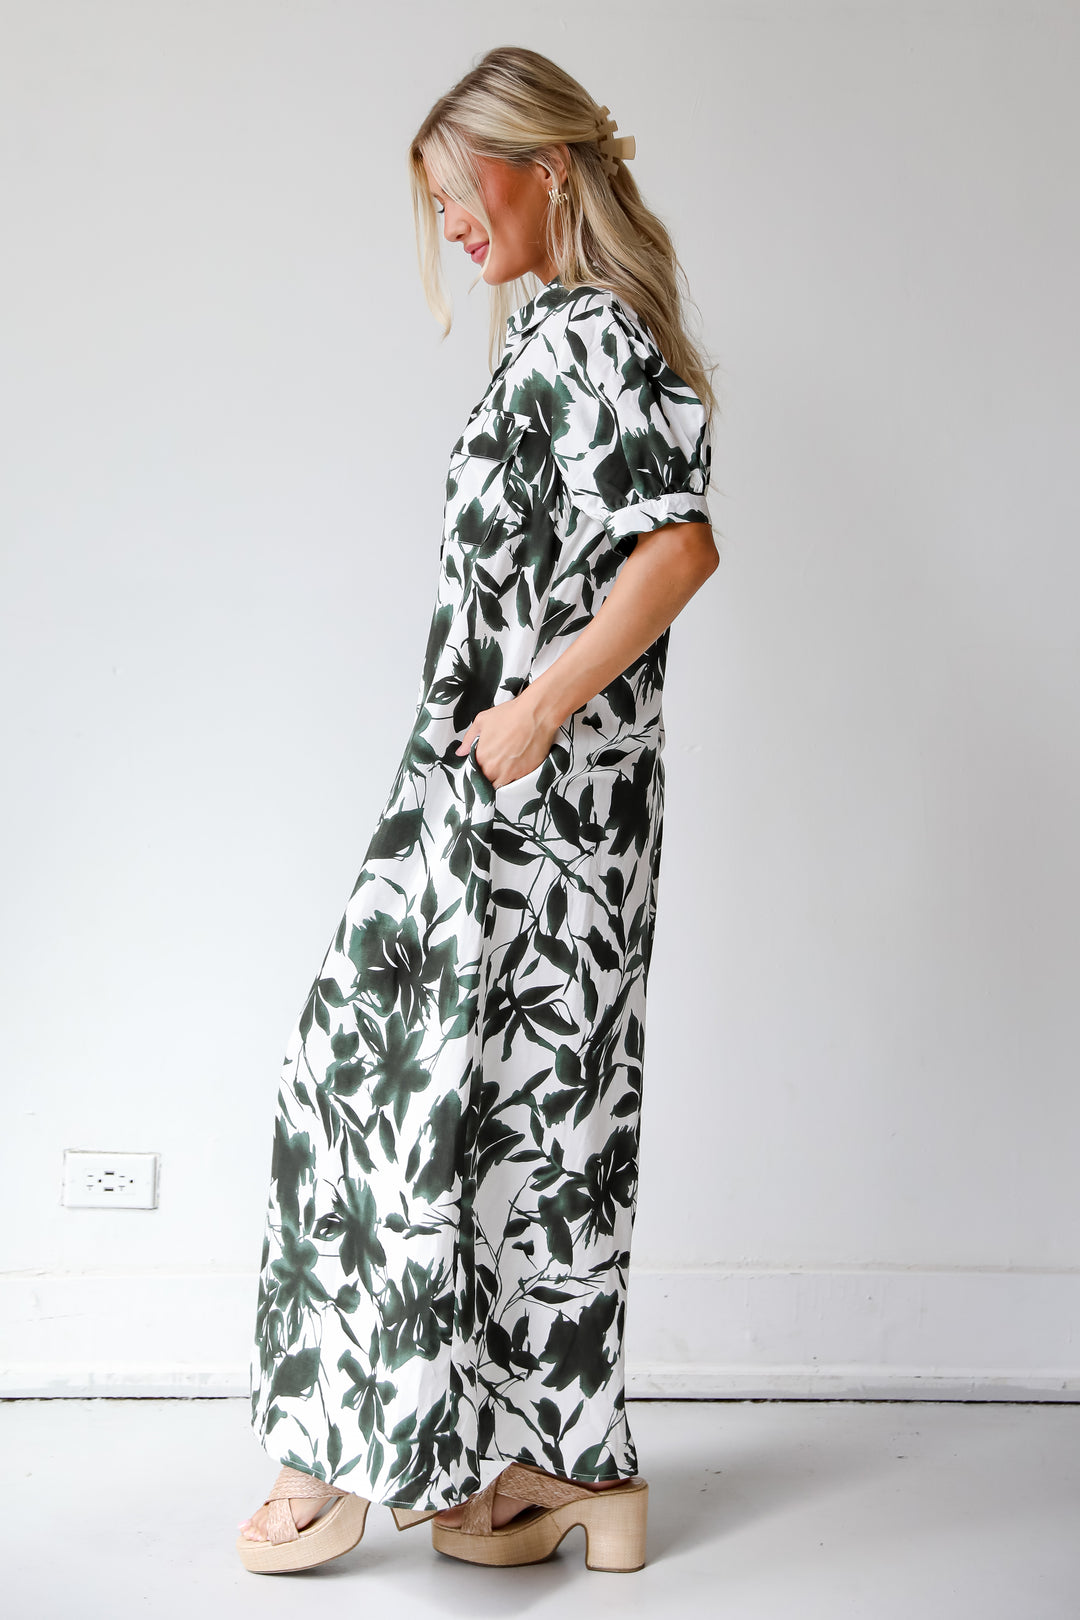 Darling Attraction Ivory Floral Maxi Dress